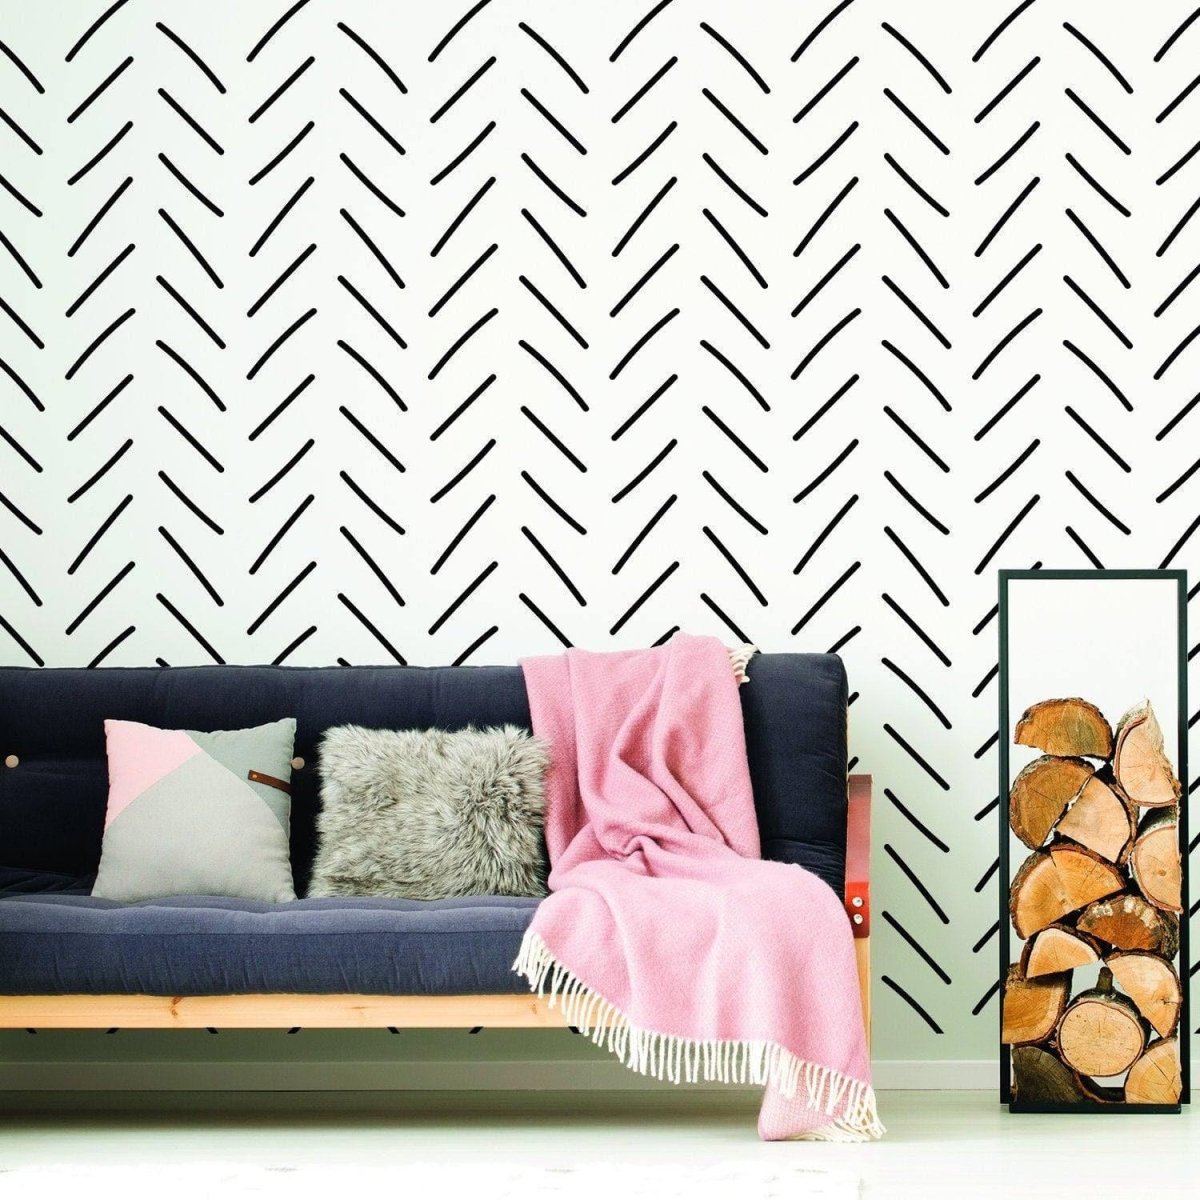 Herringbone Wallpaper Peel and Stick Stickers - Transform Your Space Effortlessly - Decords